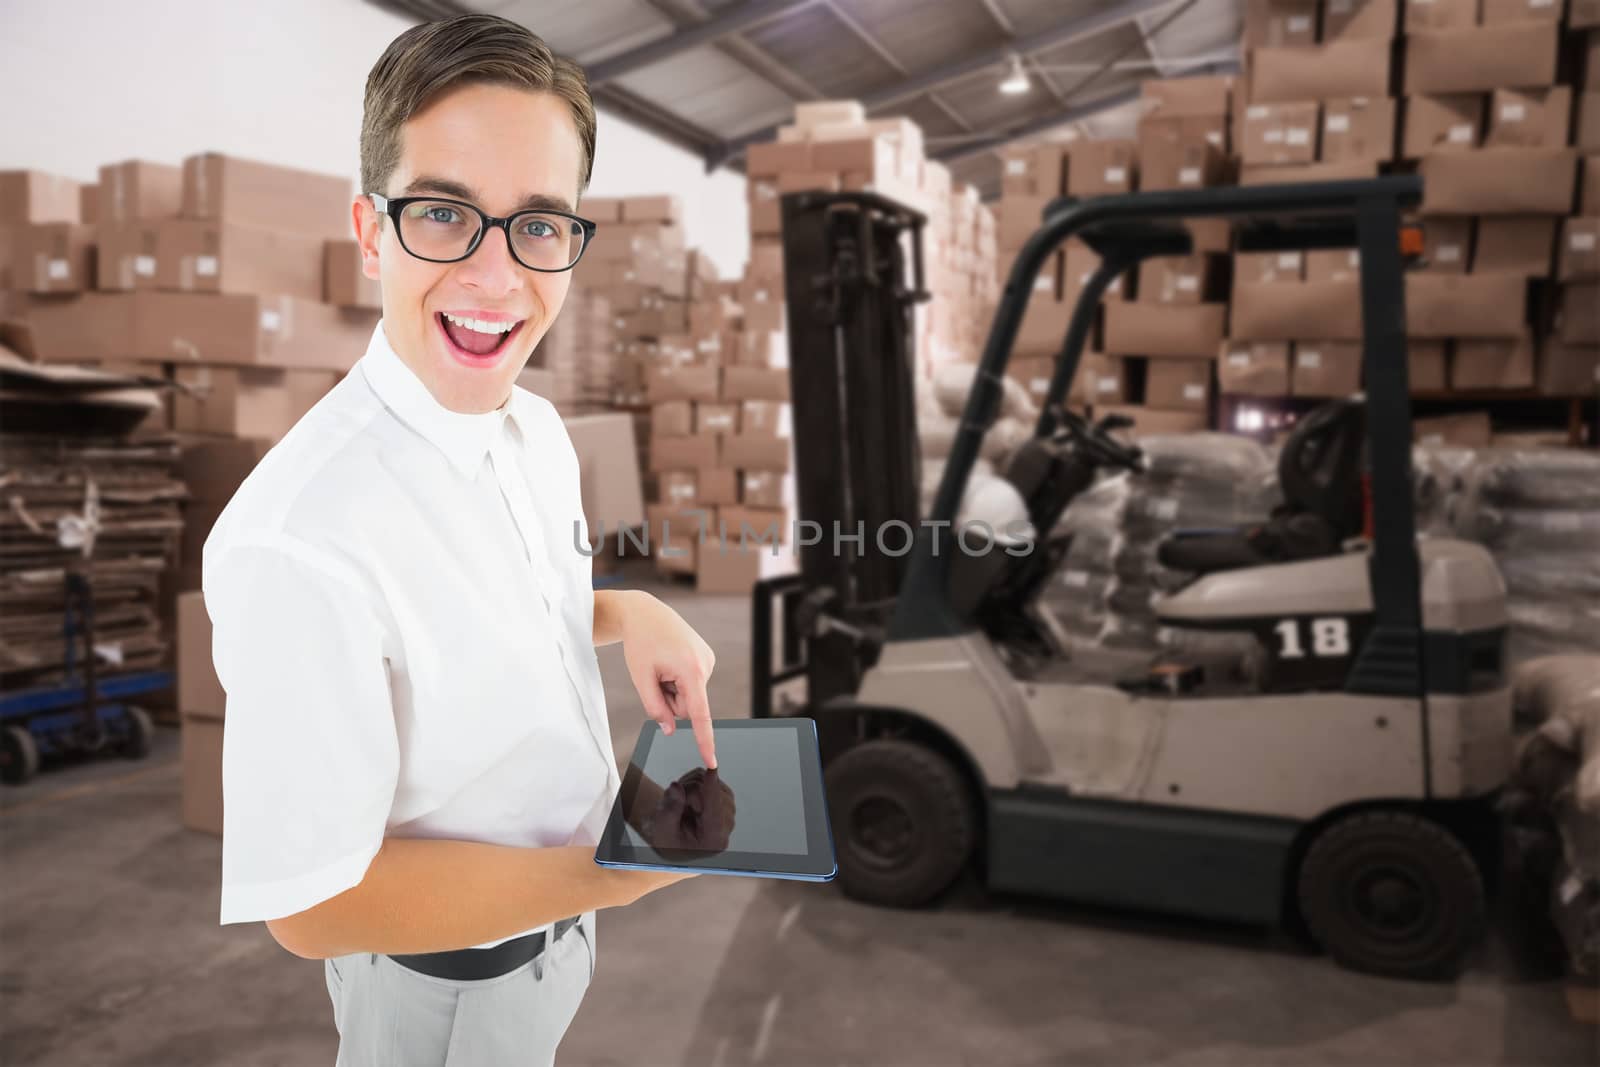 Geeky businessman using his tablet pc against warehouse worker loading up pallet